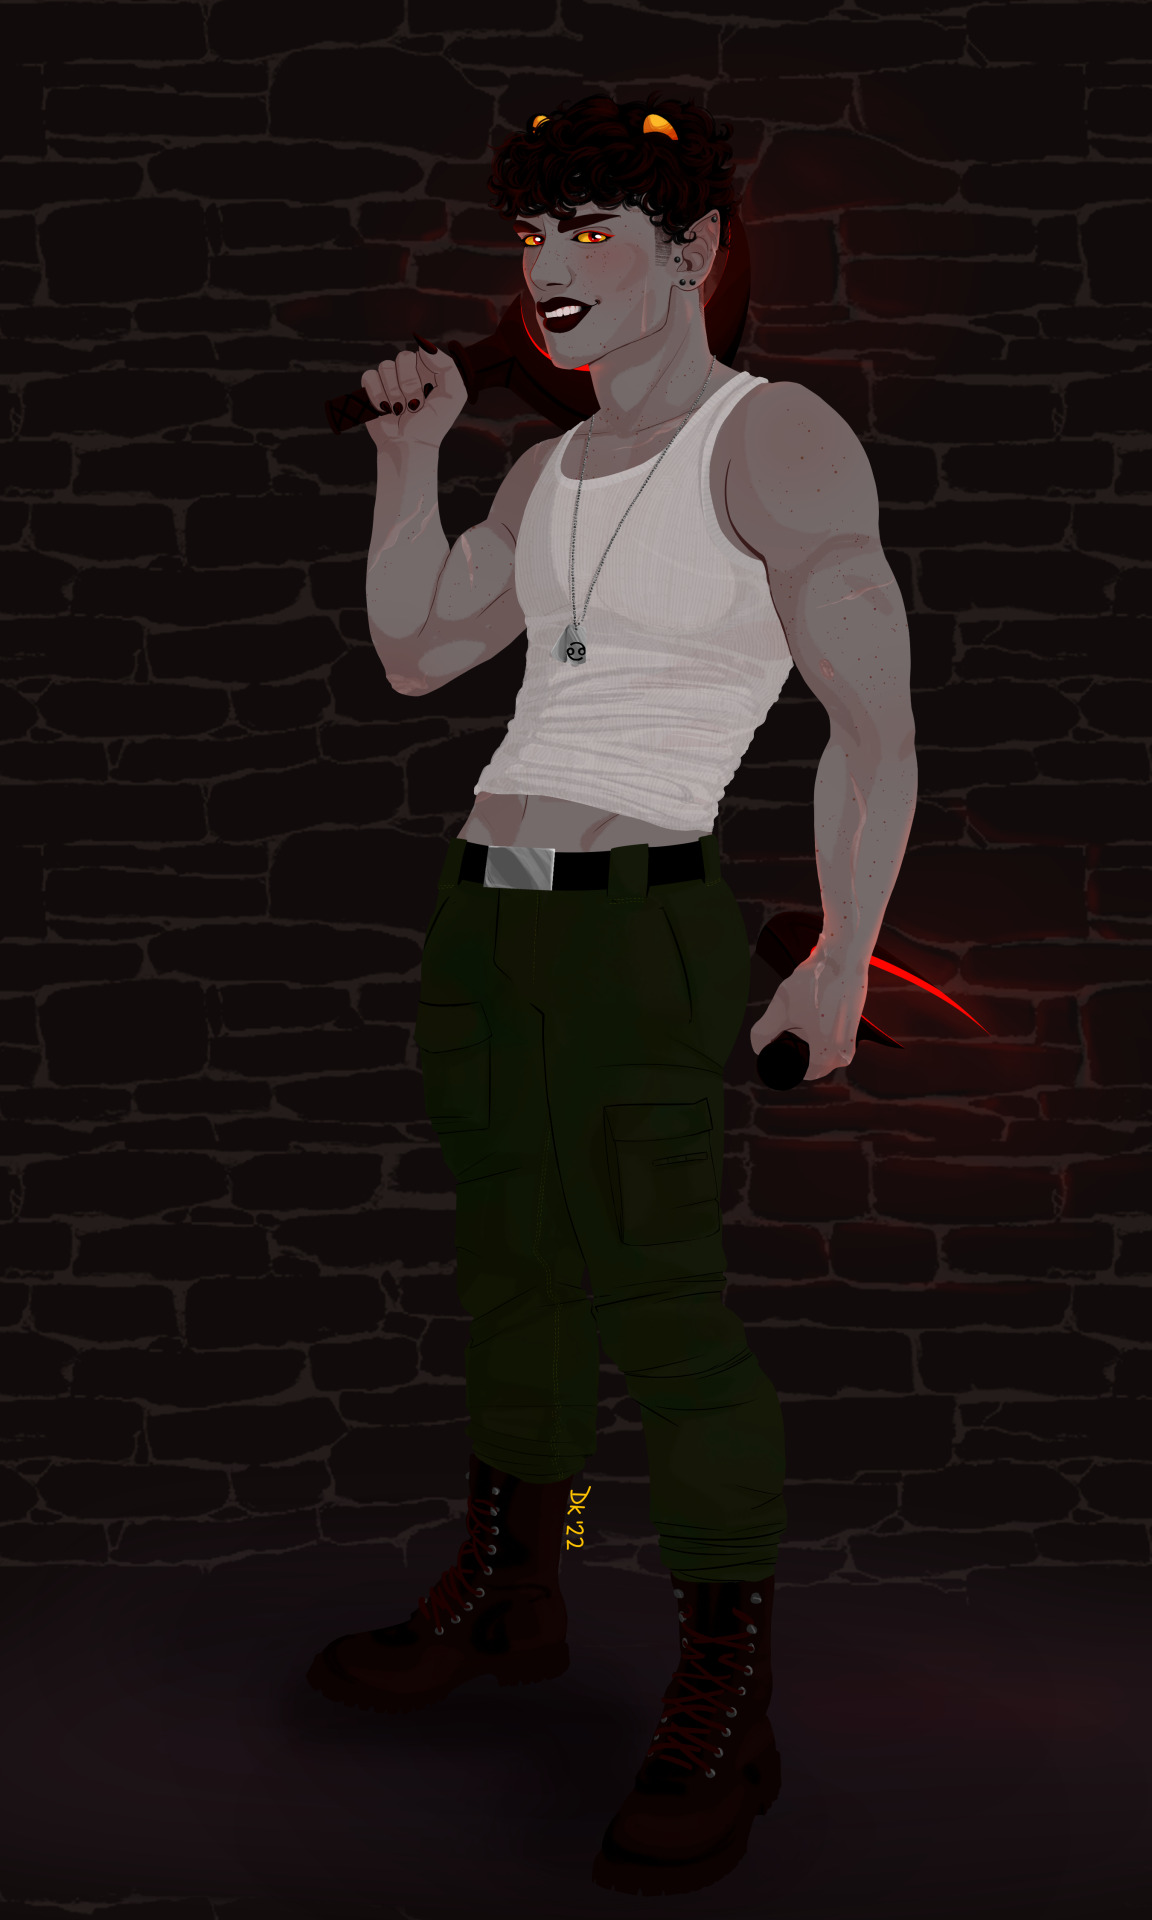 well it took a few days longer than intended, but as promised, Hot Karkat Summer is upon us. @callmearcturus please accept this humble offering, and thank you as usual for the inspiration. in the words of one Dave Strider, “ Paramilitary Wet Dream Chic never went out of style, apparently.” #homestuck#karkat vantas #hot karkat summer  #you get both shirted and shirtless versions bc i drew the shirt first and got attached  #even tho i think it looks better w/o it  #anyways YEESH this took me back. last (and only other) time i drew karkat i was still in highschool  #can you believe it? wild how time flies  #anyways there isnt any like. specific fic/scene this is from i just wanted to draw hot buff karkat w his sickles but needed some kind of bg  #so no. i dont know why hes posing in front of a dimly lit brick wall. dont worry about it. the wall is metaphorical or smthg. idk  #also i havent decided if his sickles are like. laser or just glowy or what i just thought it looked cool  #and kept them visible bc otherwise they kinda just disappear into the bg  #ANYWAYS once again thank you archie for your excellent taste and ideas  #hot karkat summer is a great ideaand everyone should participate #daria draws #fakdhfgkdjf tumblr i am going to Bite You stop breaking the pings in my gd posts!  #if yall saw me post this like 5 miutes ago no you didnt. i didnt just remake this entire post to ensure the tagging worked properly.  #if this one doesnt work im gonna start biting for real